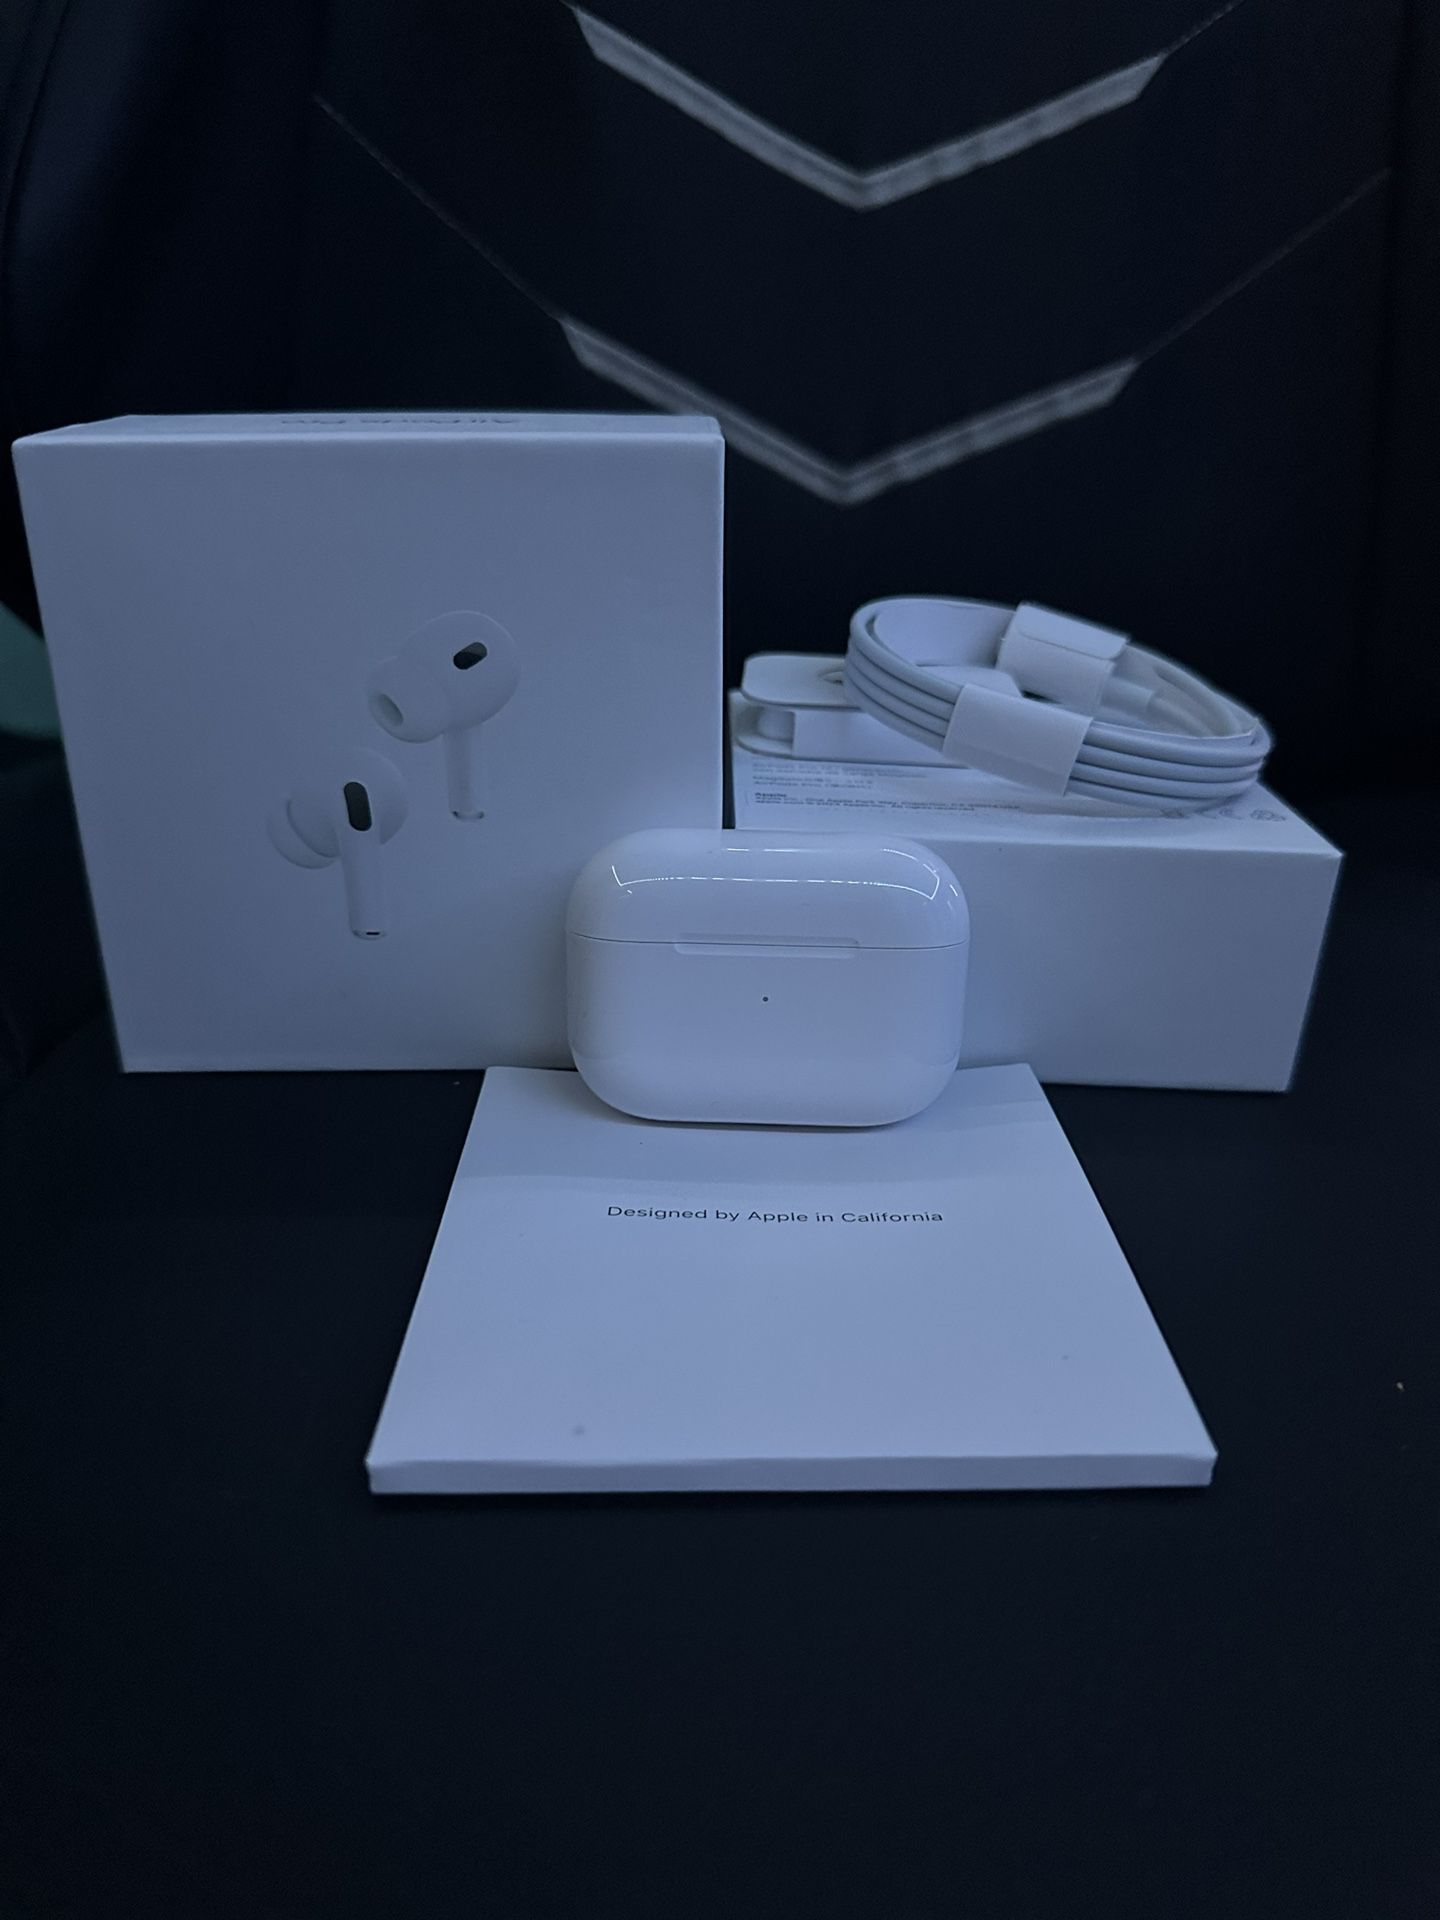 AirPod pros (2nd generation)